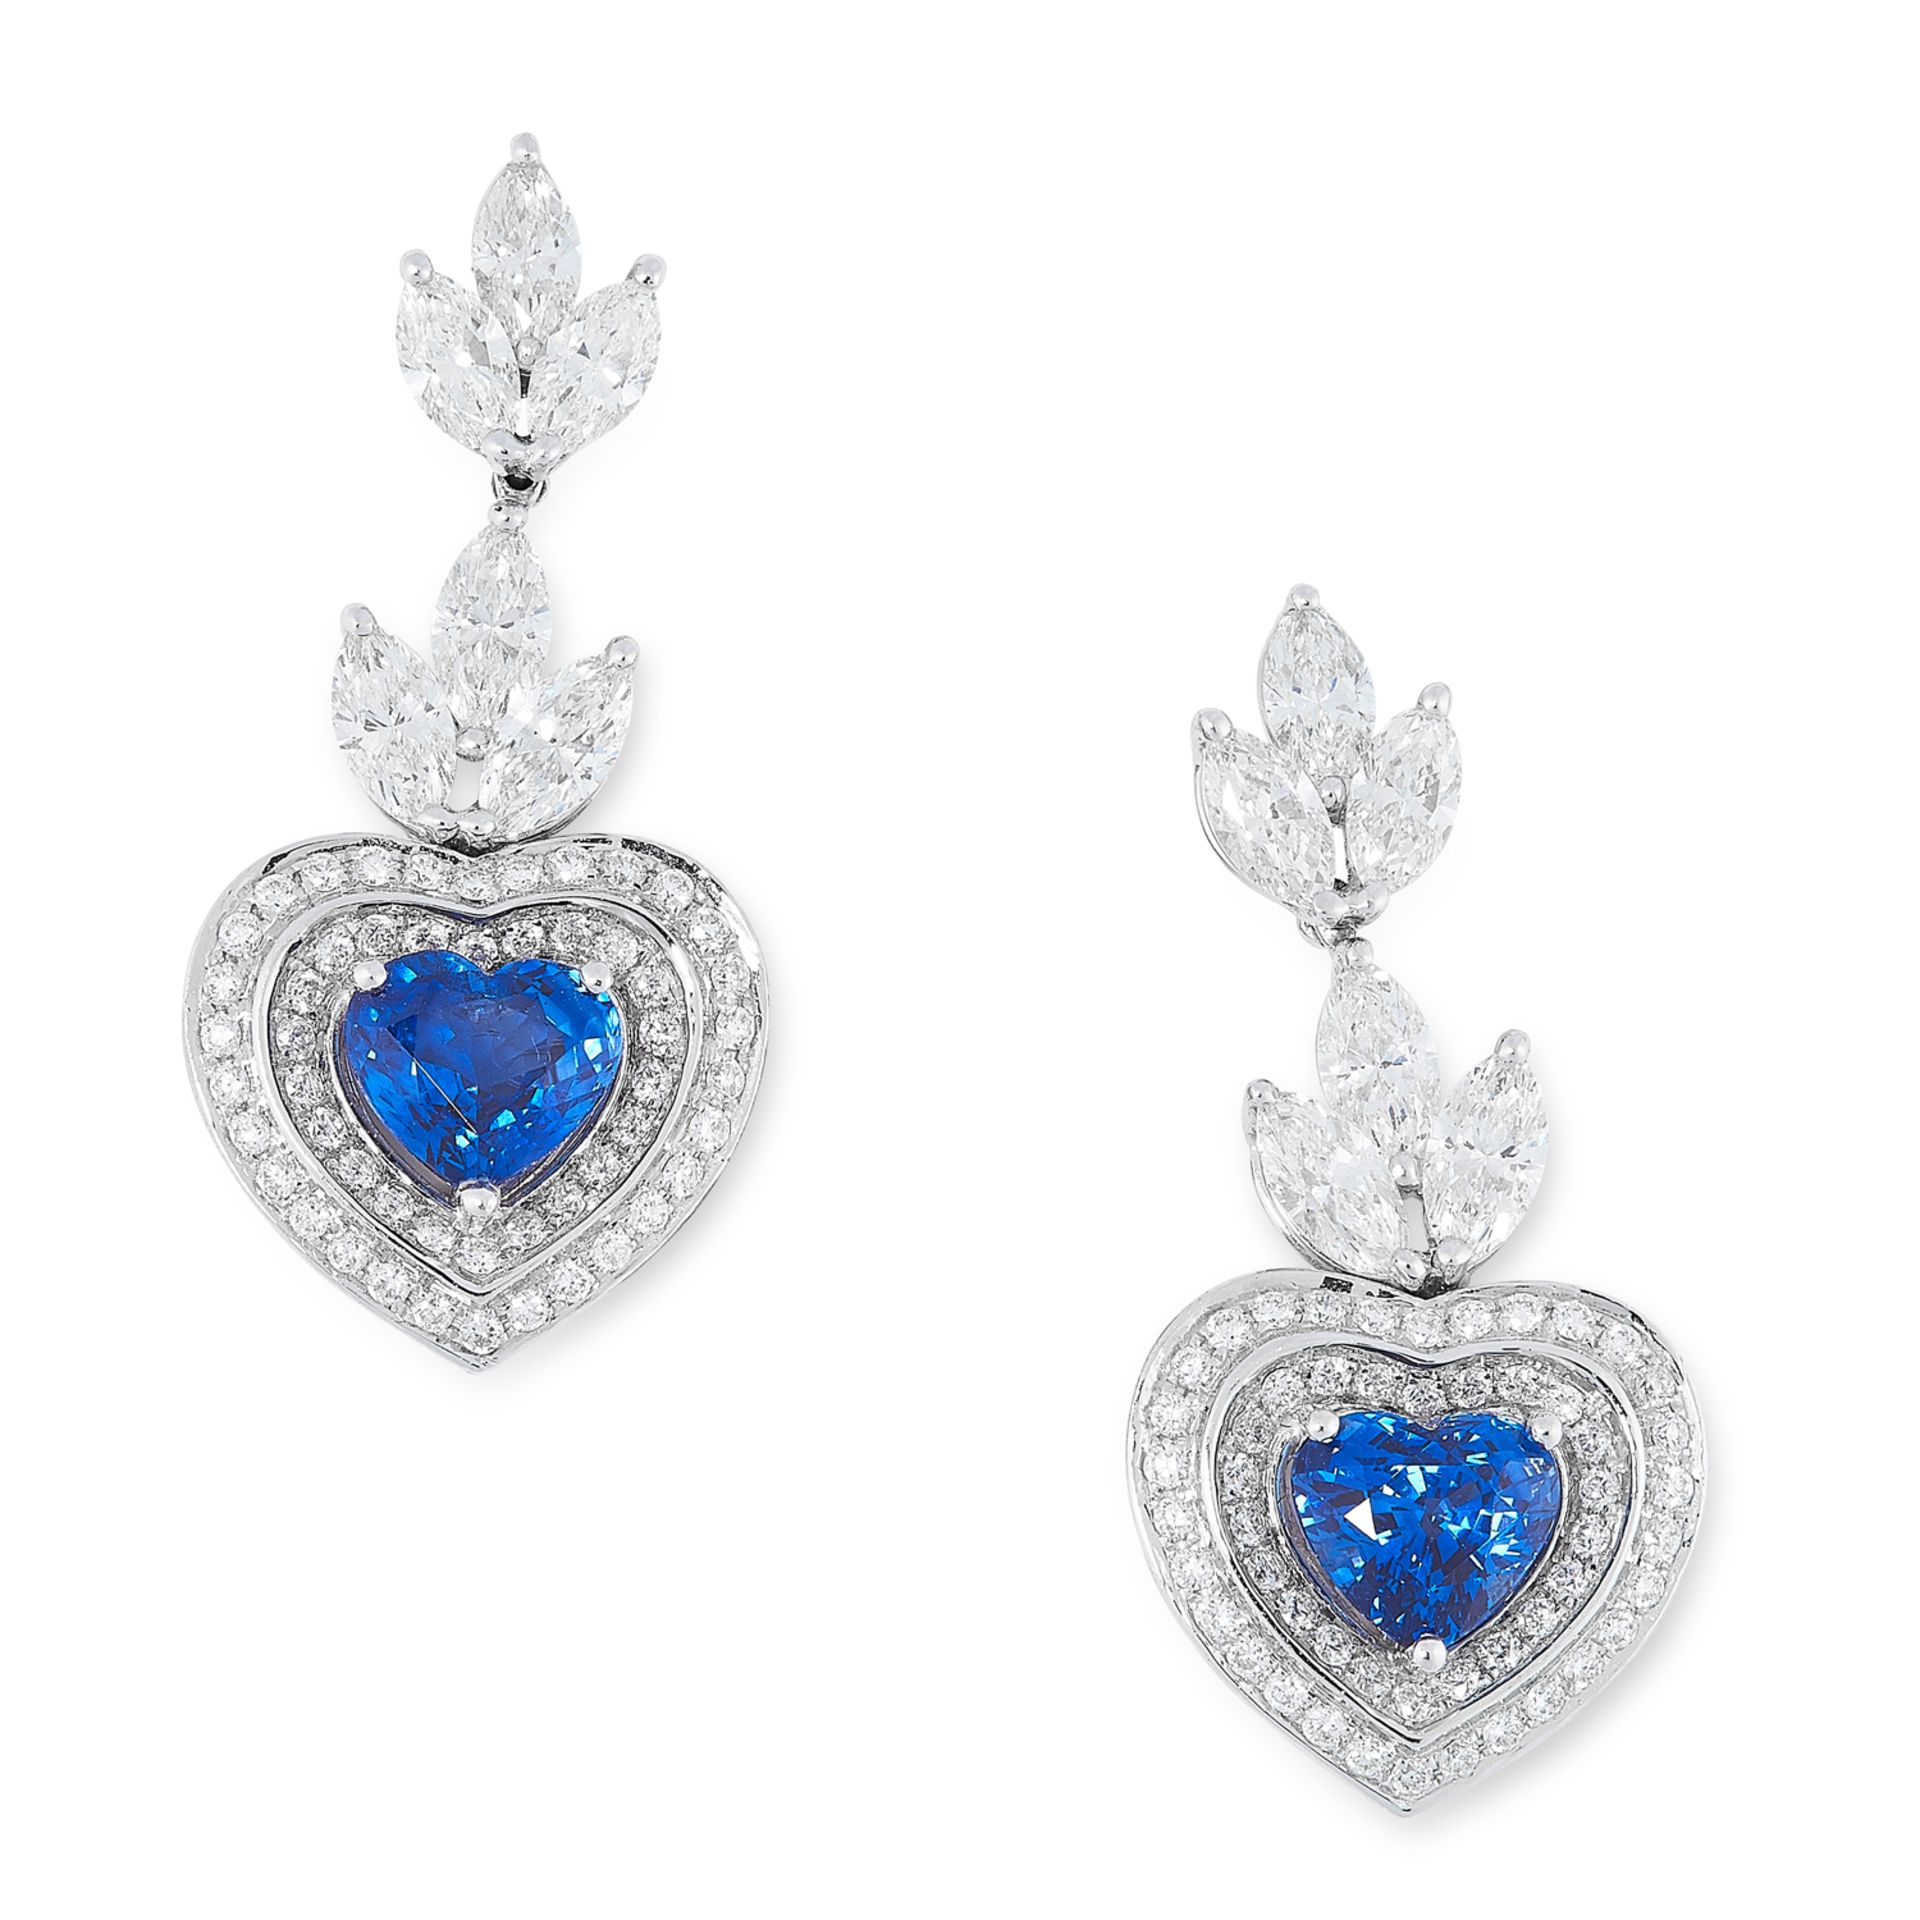 A PAIR OF SAPPHIRE AND DIAMOND DROP EARRINGS each set with a row of marquise cut diamonds suspending